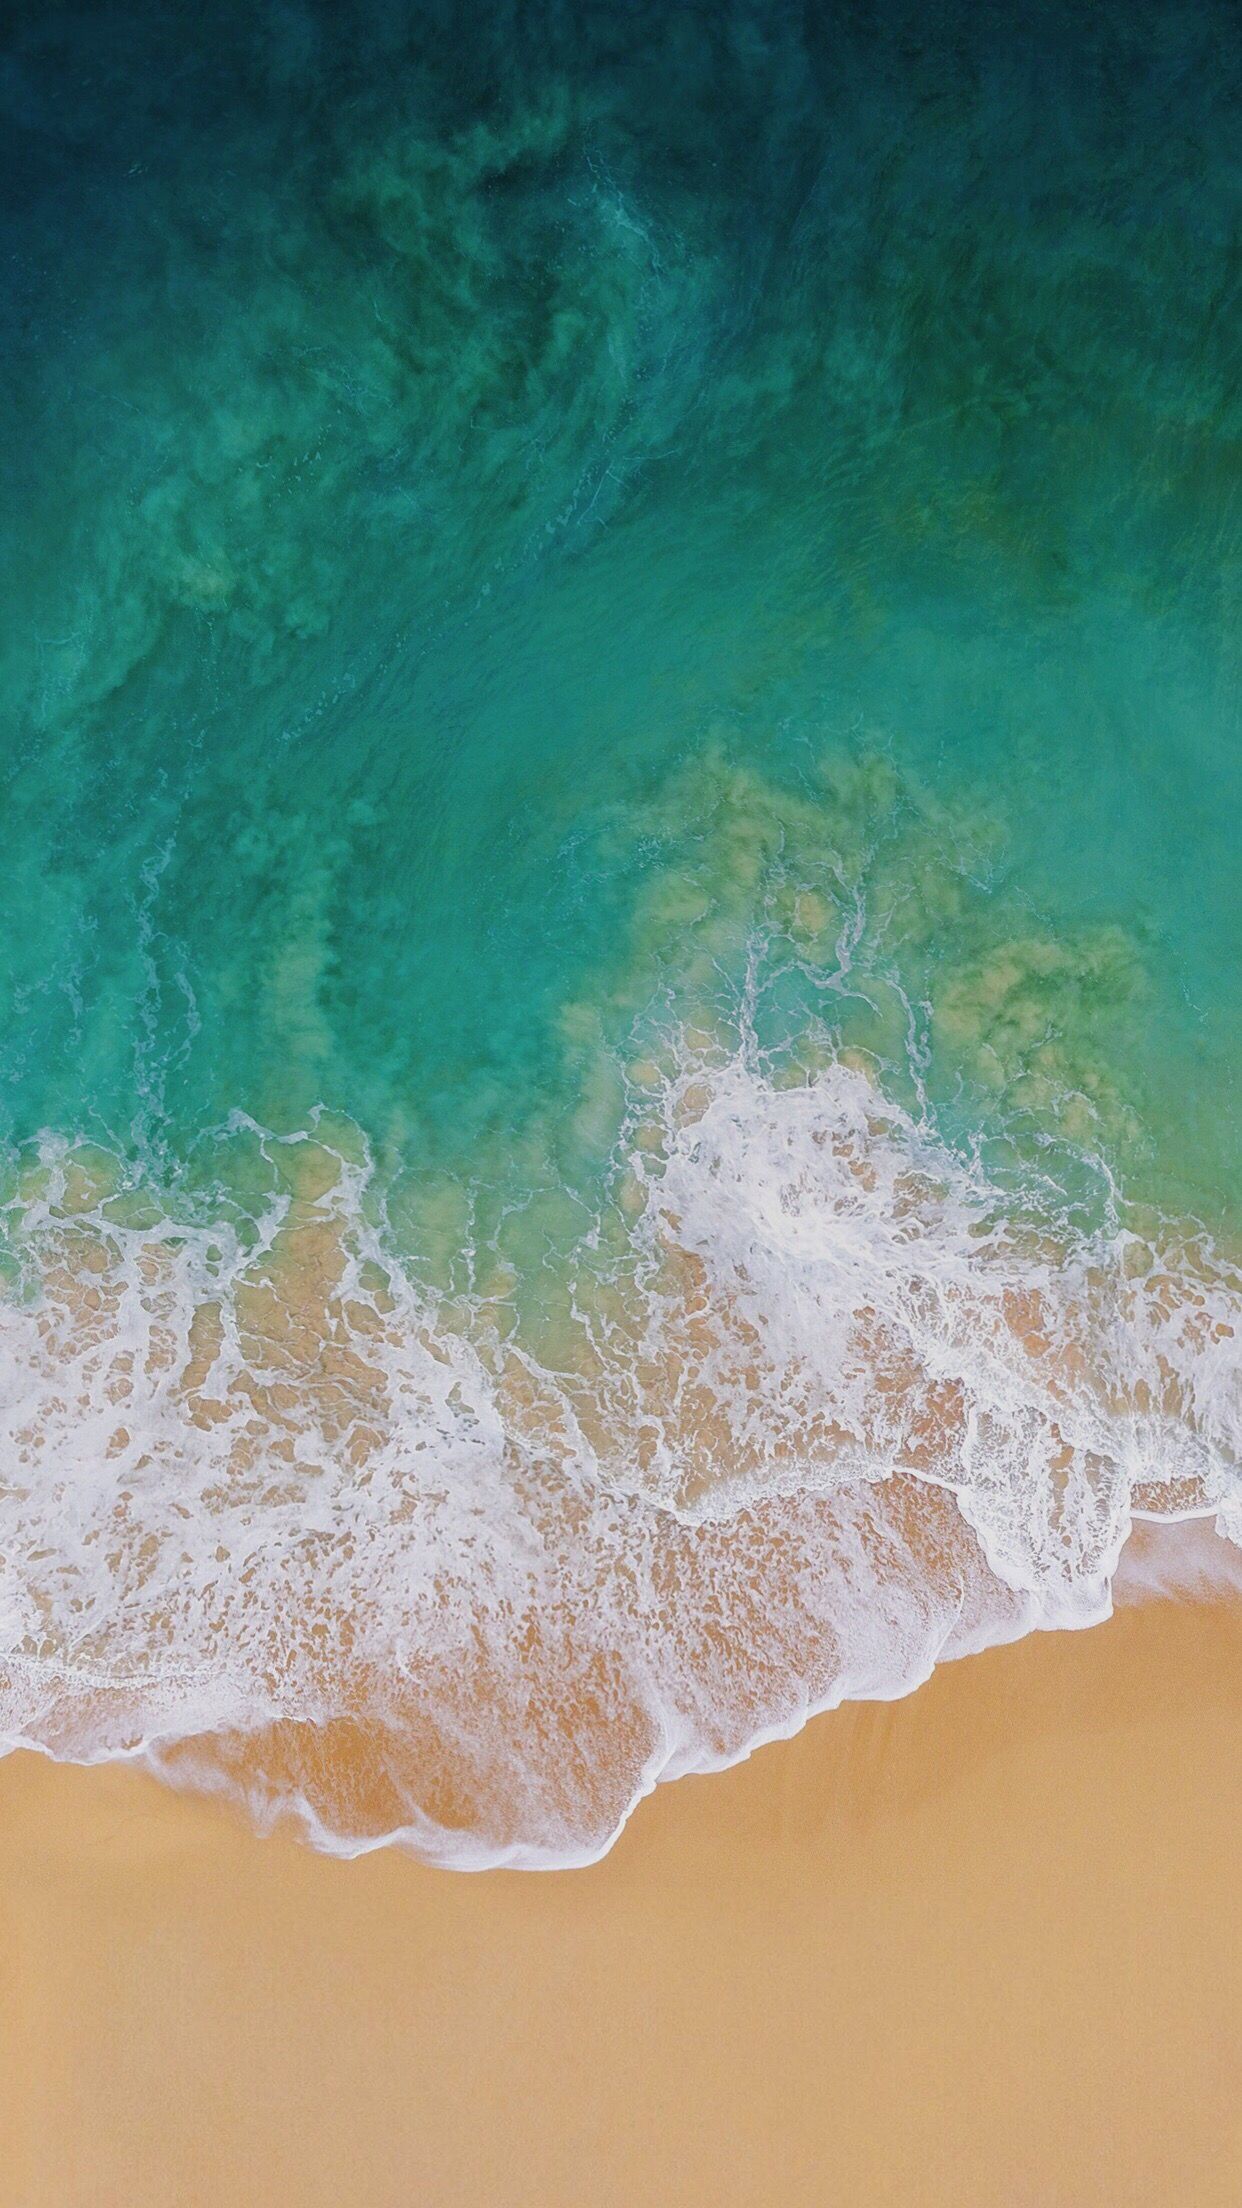 Download The IOS 11 Wallpaper Here (in High Resolution)